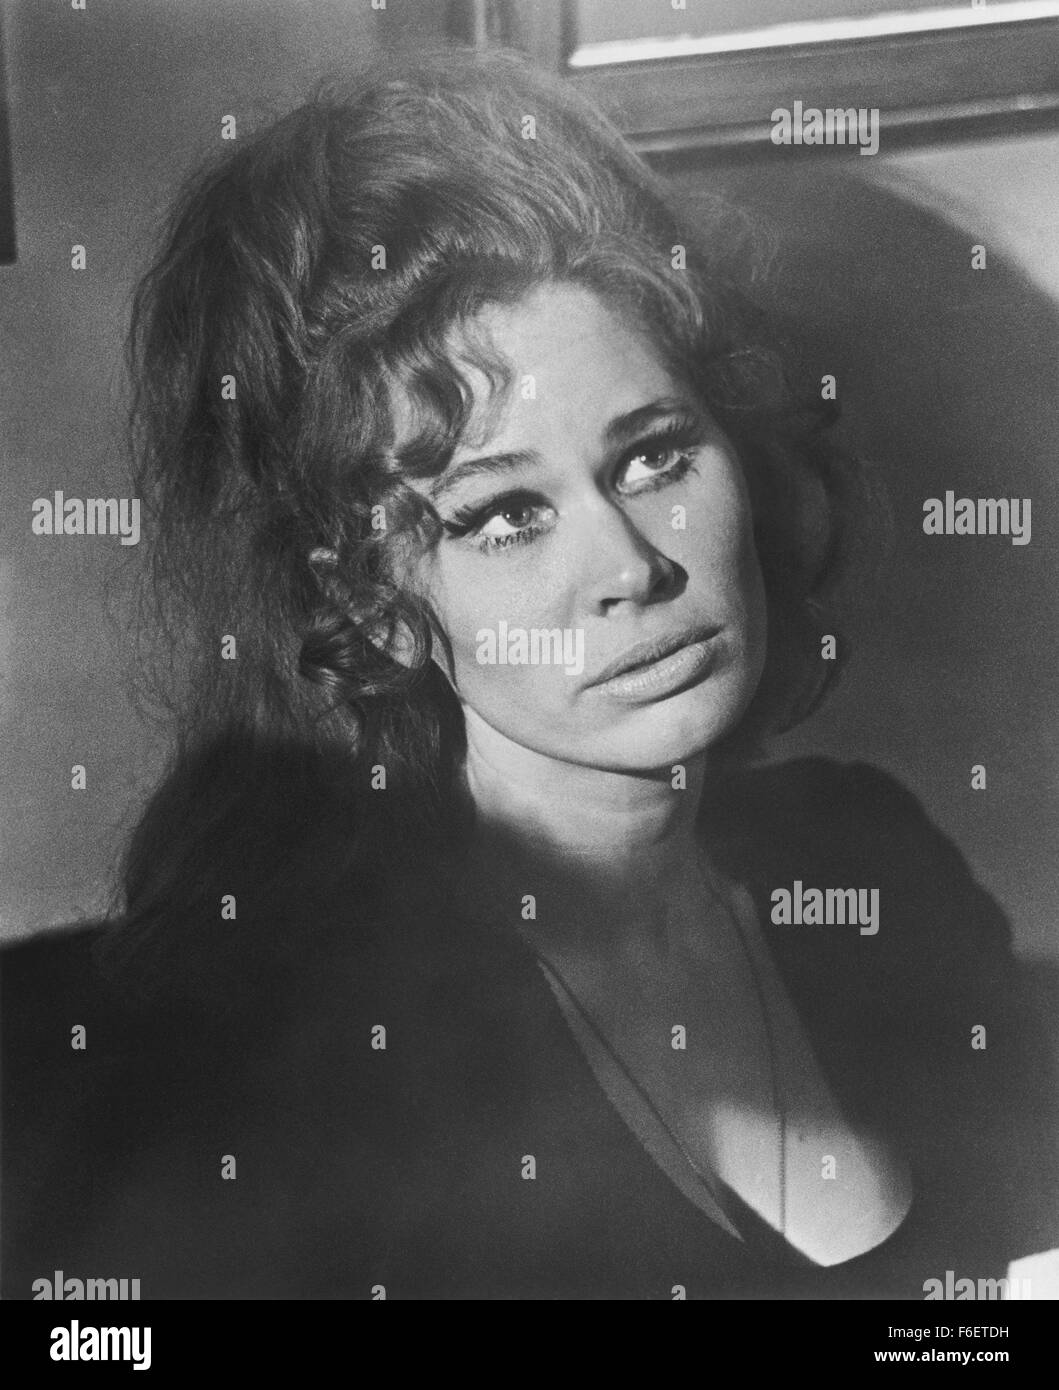 Sep 12, 1970; Vancouver, BC, CANADA; Actress KAREN BLACK as Rayette Dipesto in the Bob Rafelson directed drama, 'Five Easy Pieces.' Stock Photo